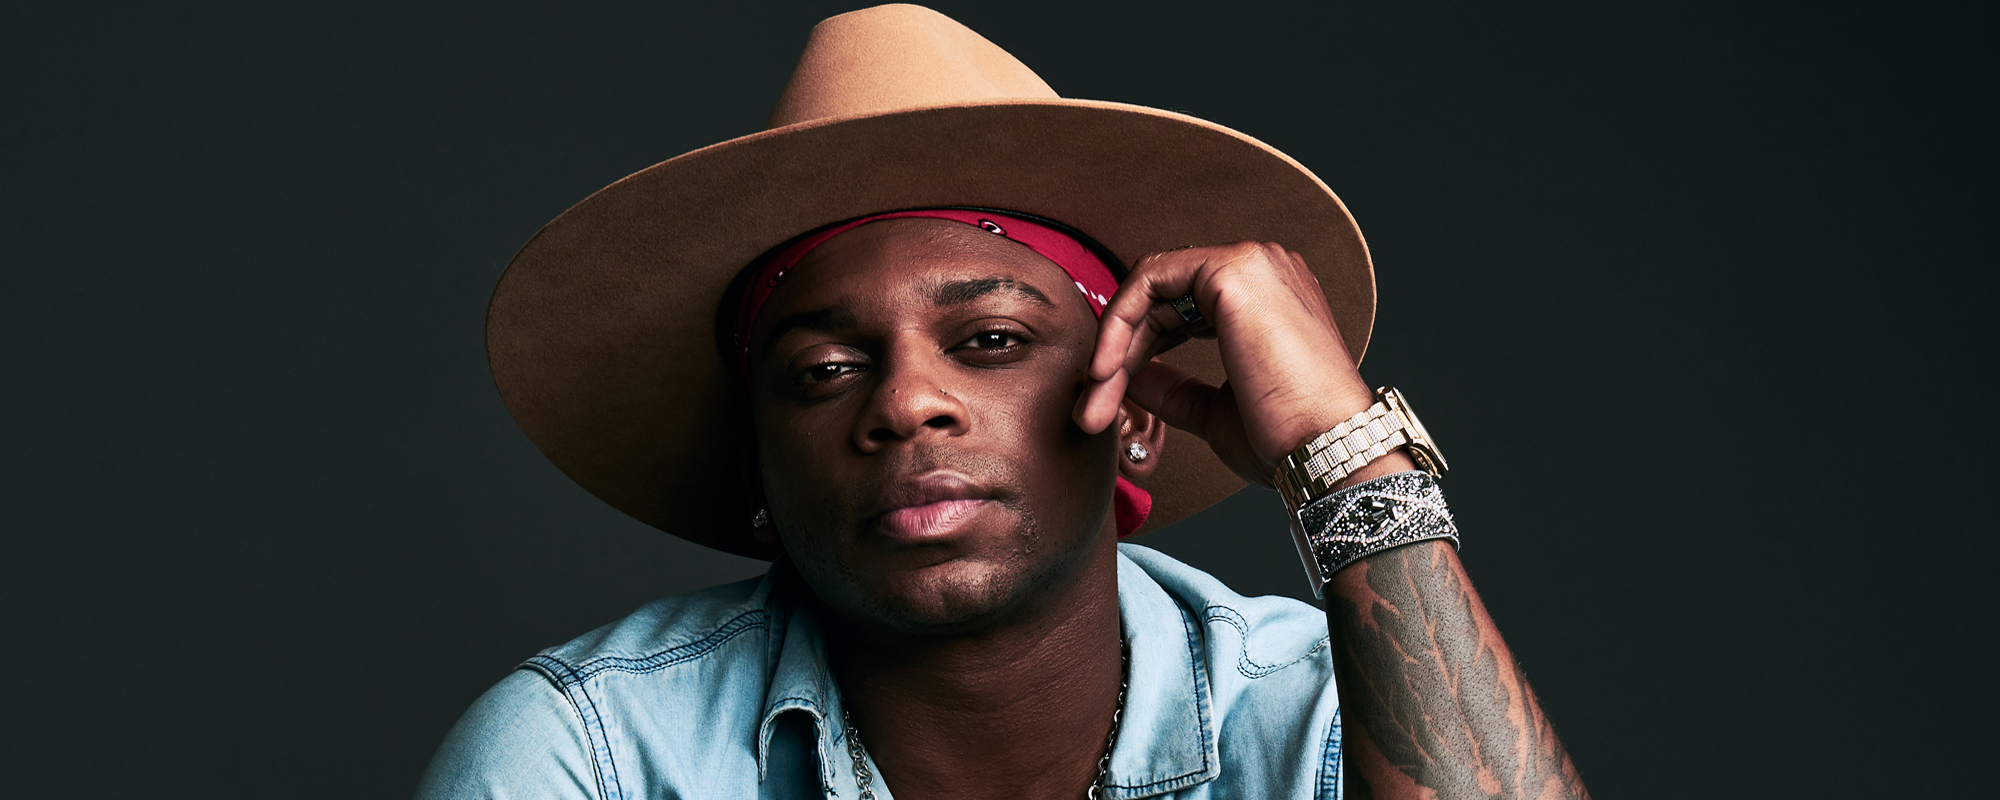 5 Things You Didn’t Know About Country Singer Jimmie Allen